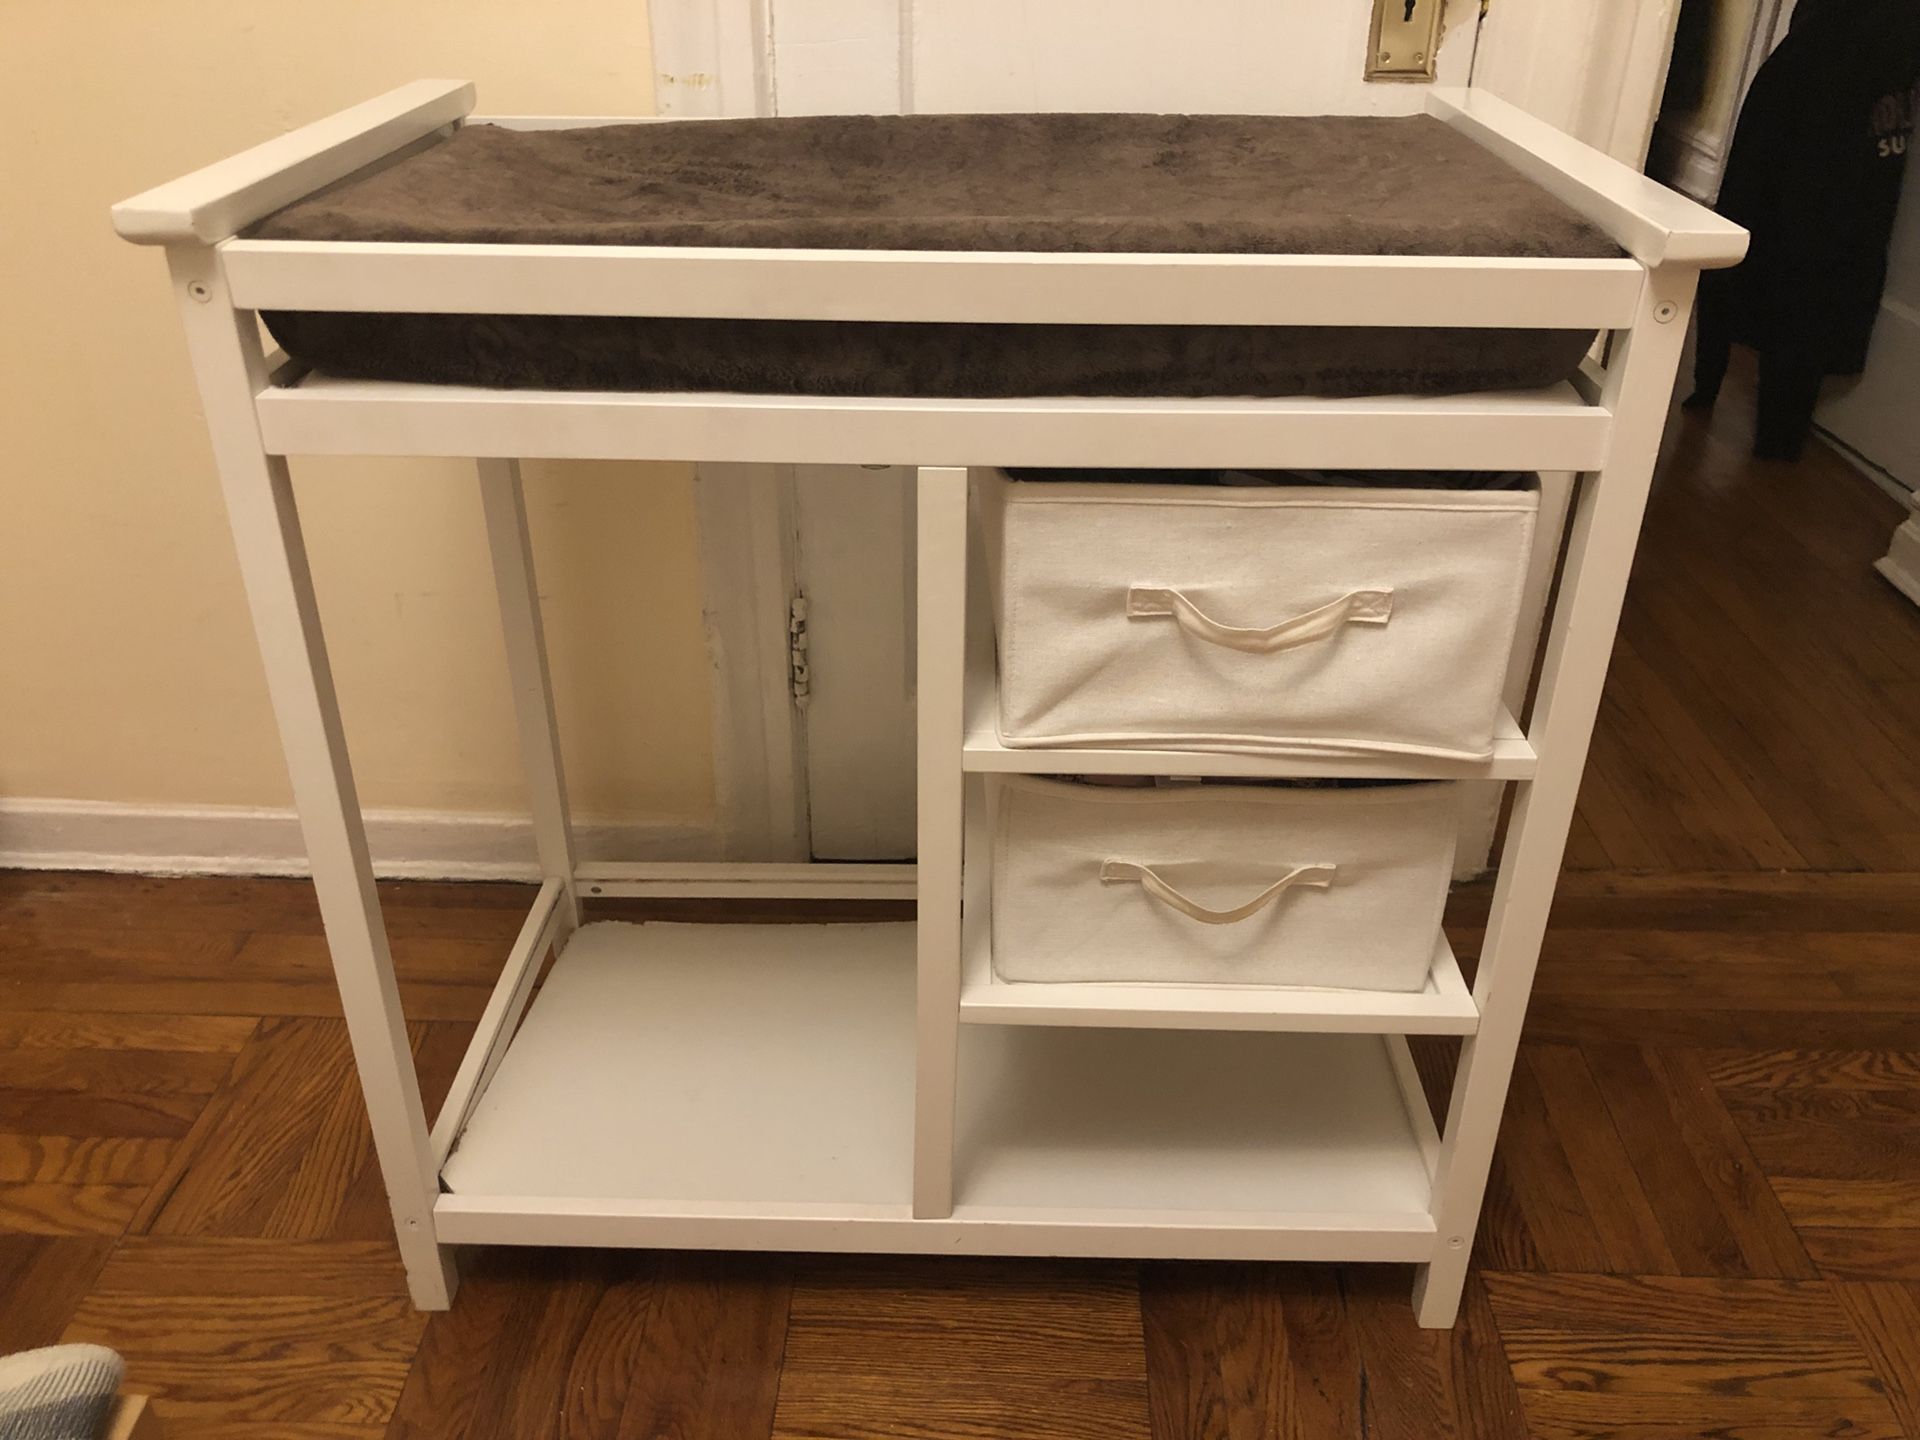 Baby changing table with pad and covers